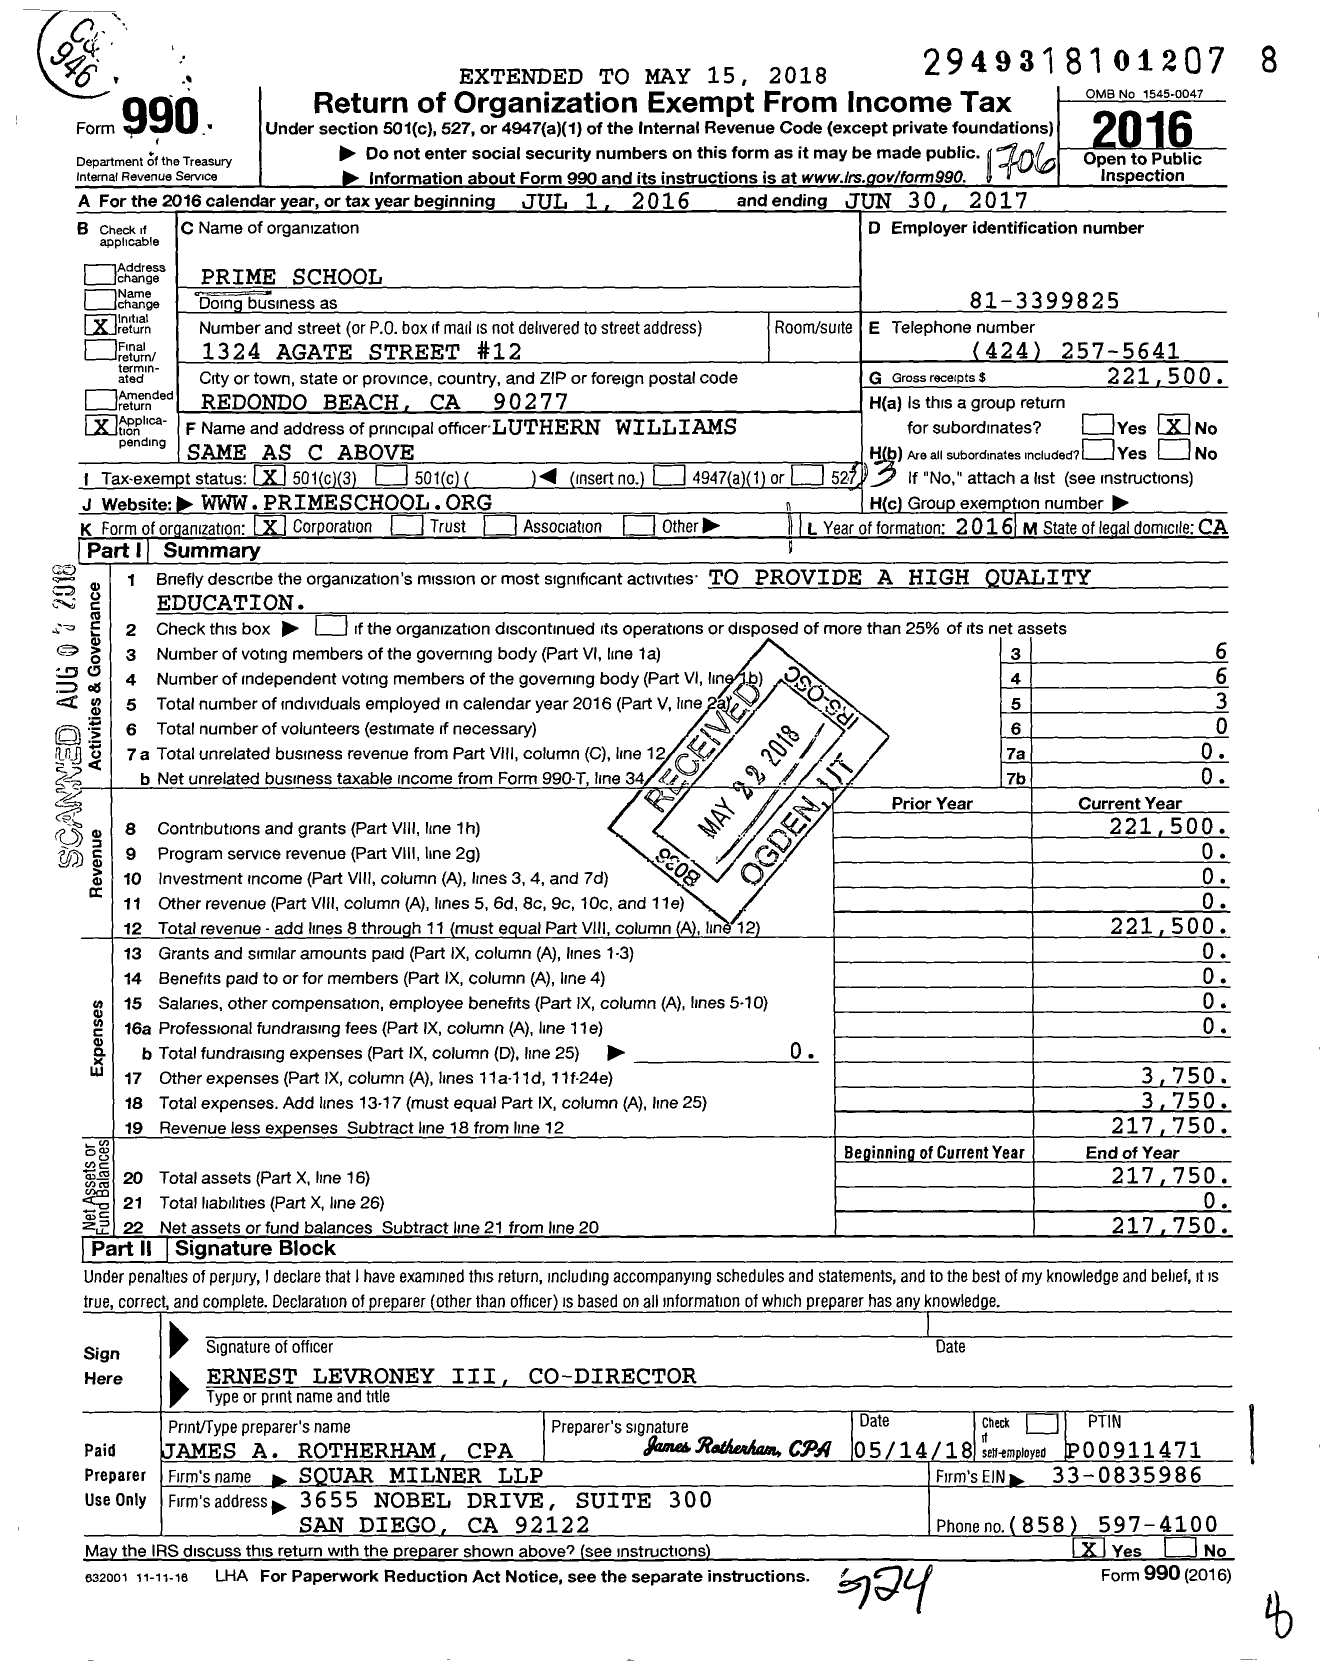 Image of first page of 2016 Form 990 for Prime School